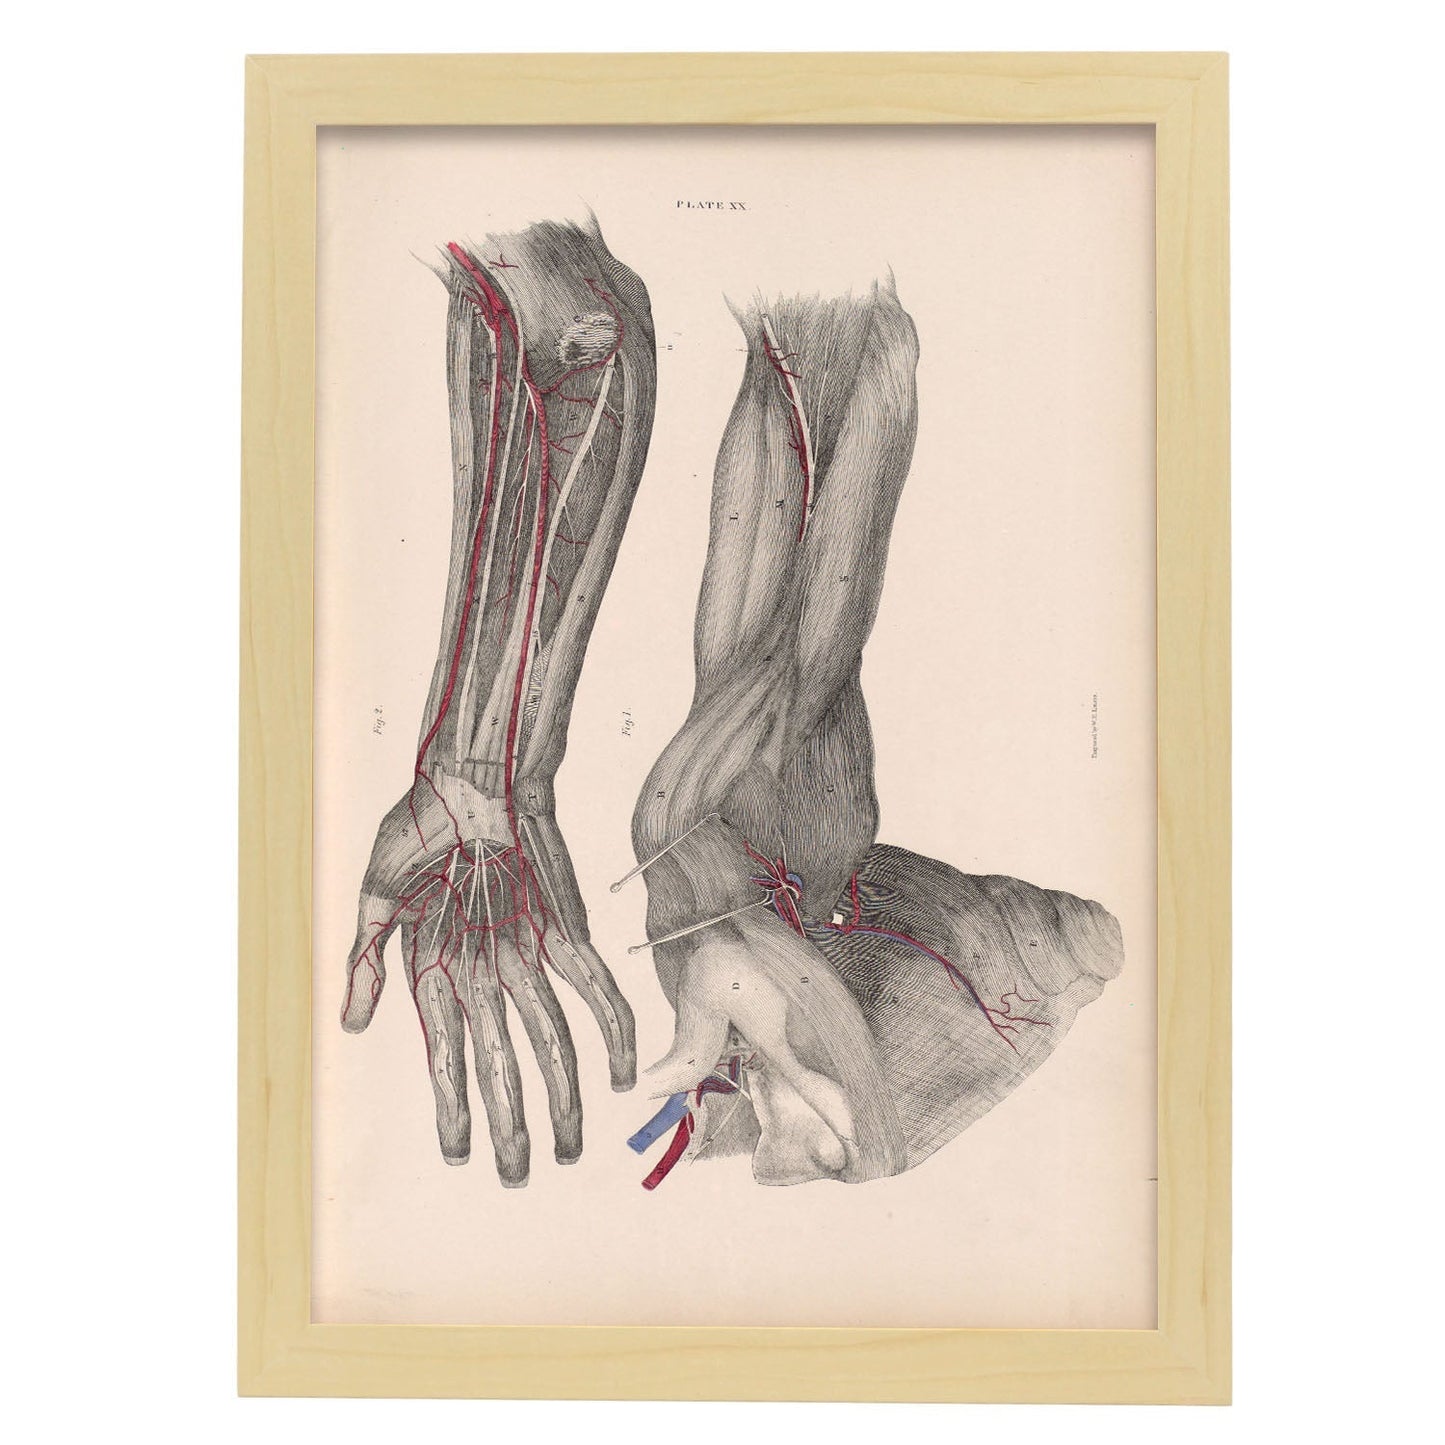 Dissection of the arm and hand-Artwork-Nacnic-A3-Marco Madera clara-Nacnic Estudio SL